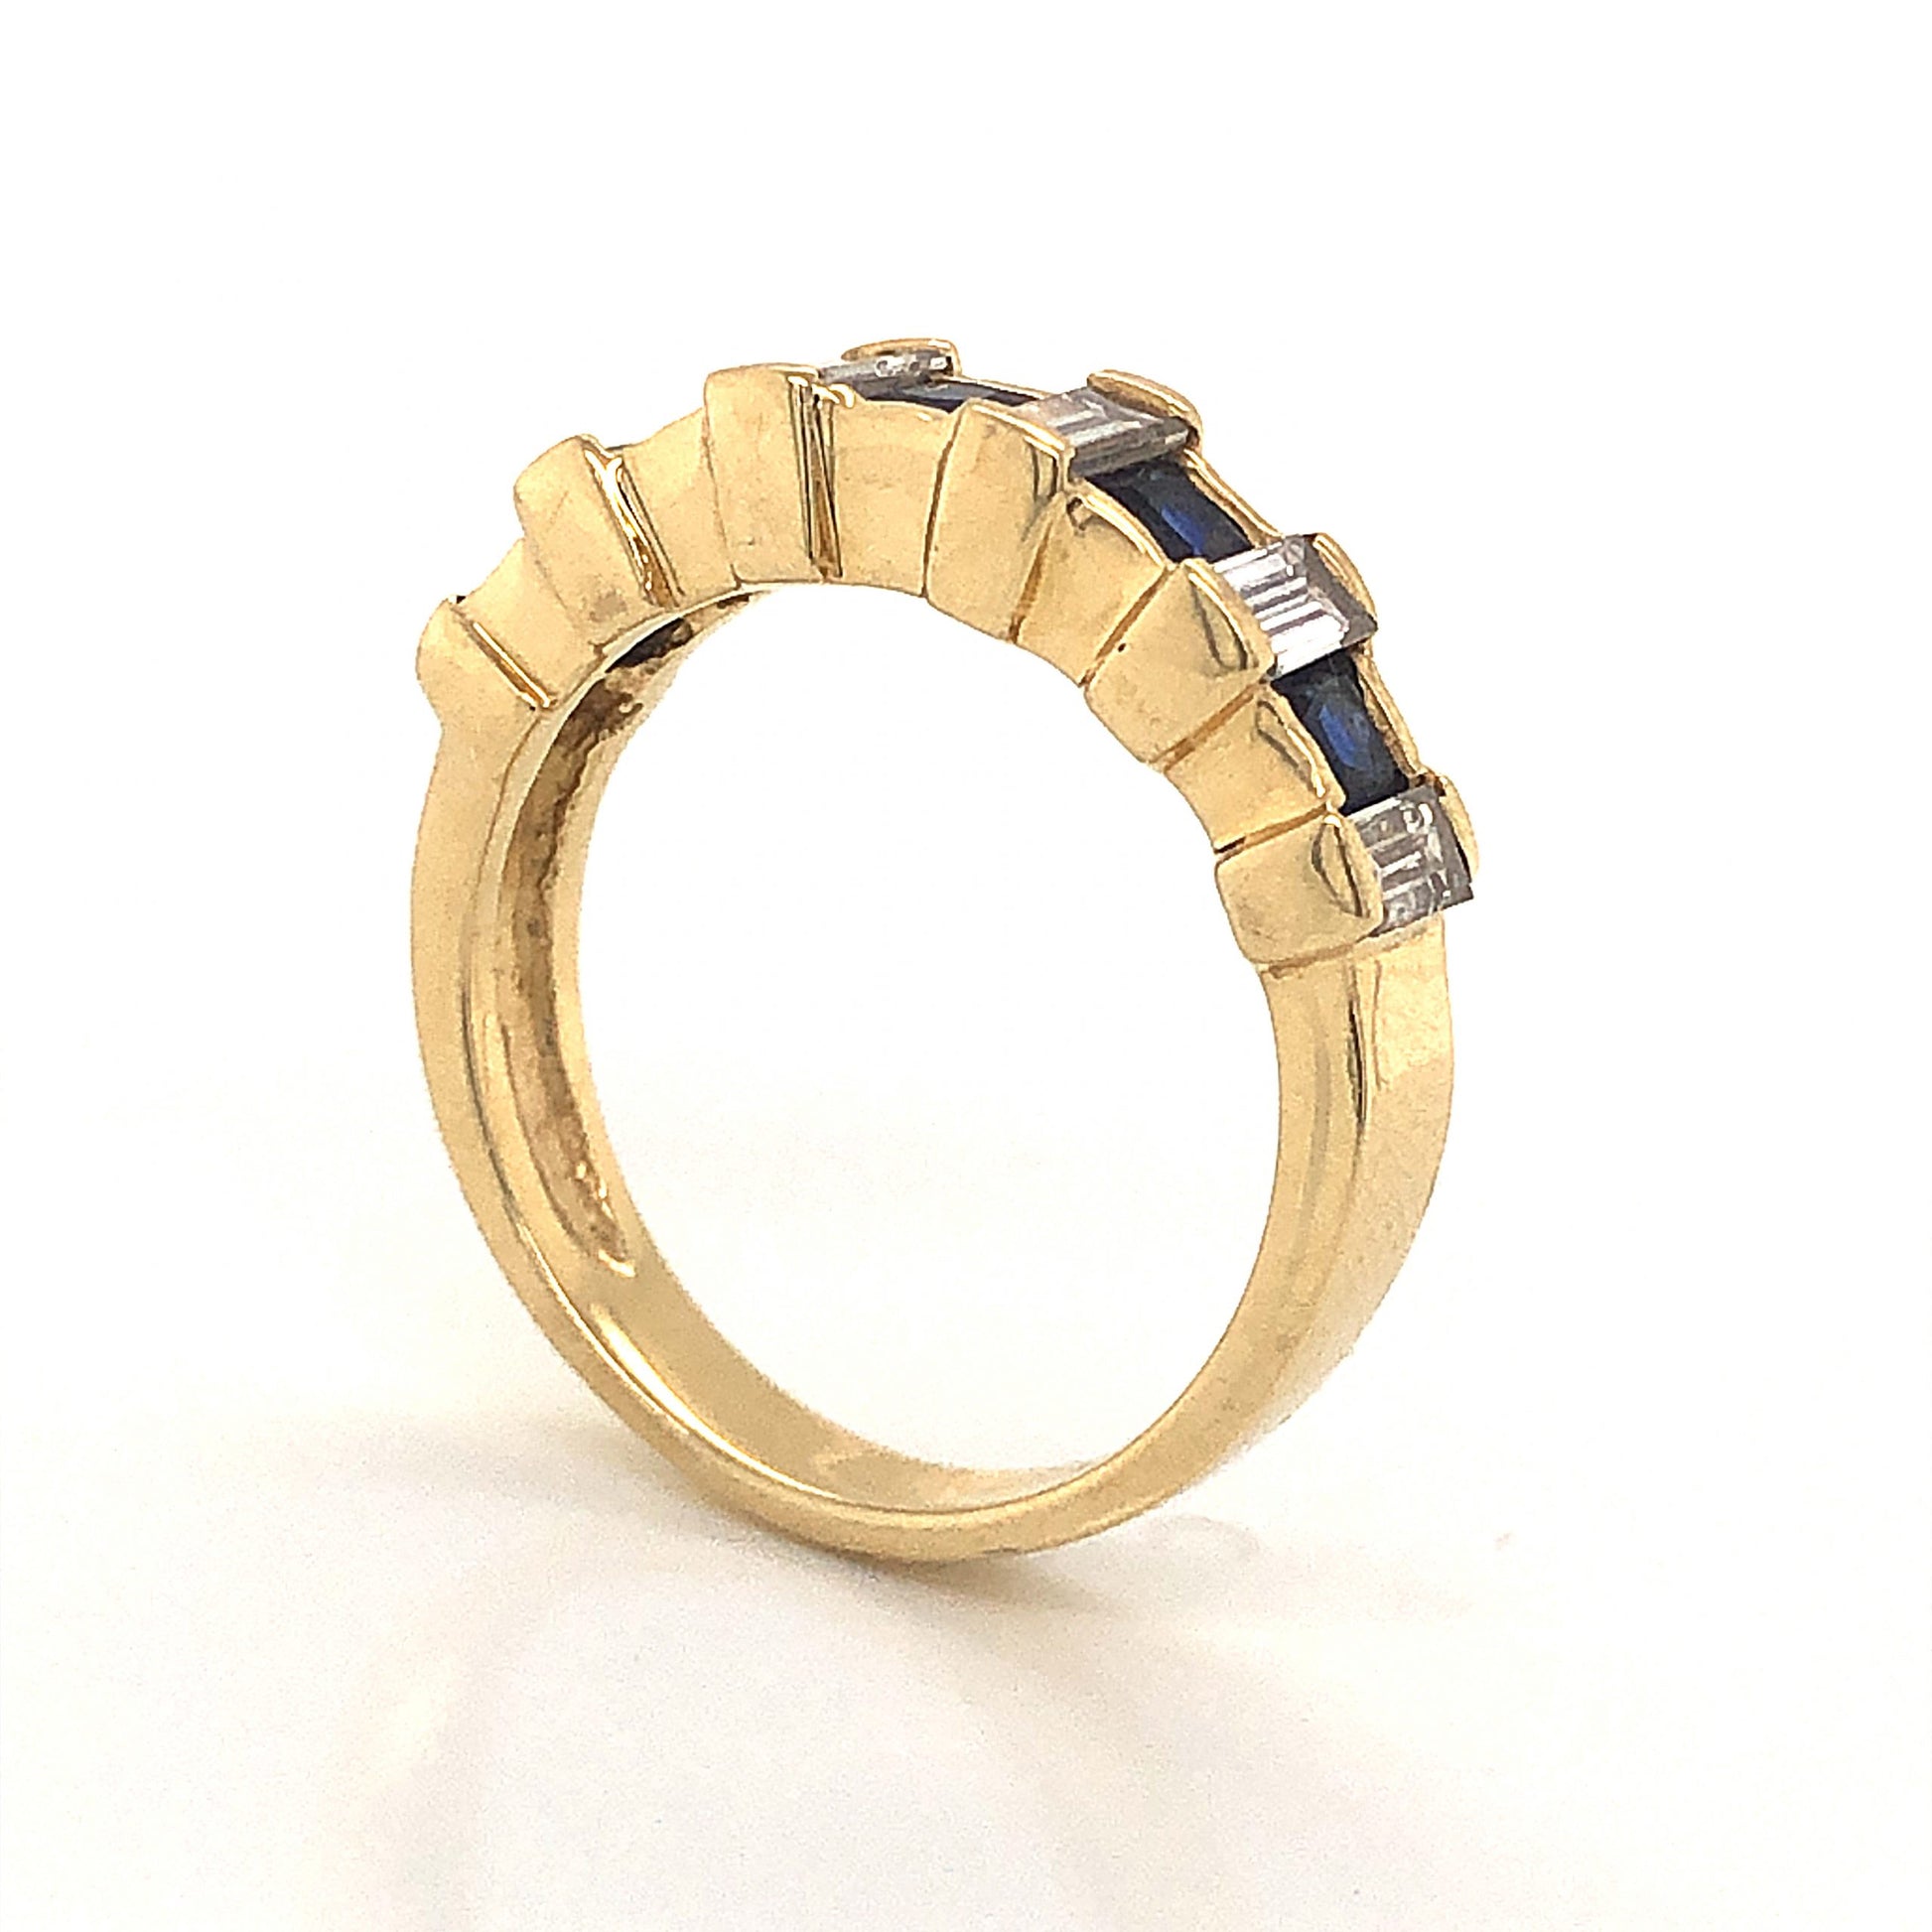 Sapphire & Baguette Diamond Wedding Band in 14k Yellow GoldComposition: 14 Karat Yellow Gold Ring Size: 5.75 Total Diamond Weight: .84ct Total Gram Weight: 3.8 g Inscription: 14k
      